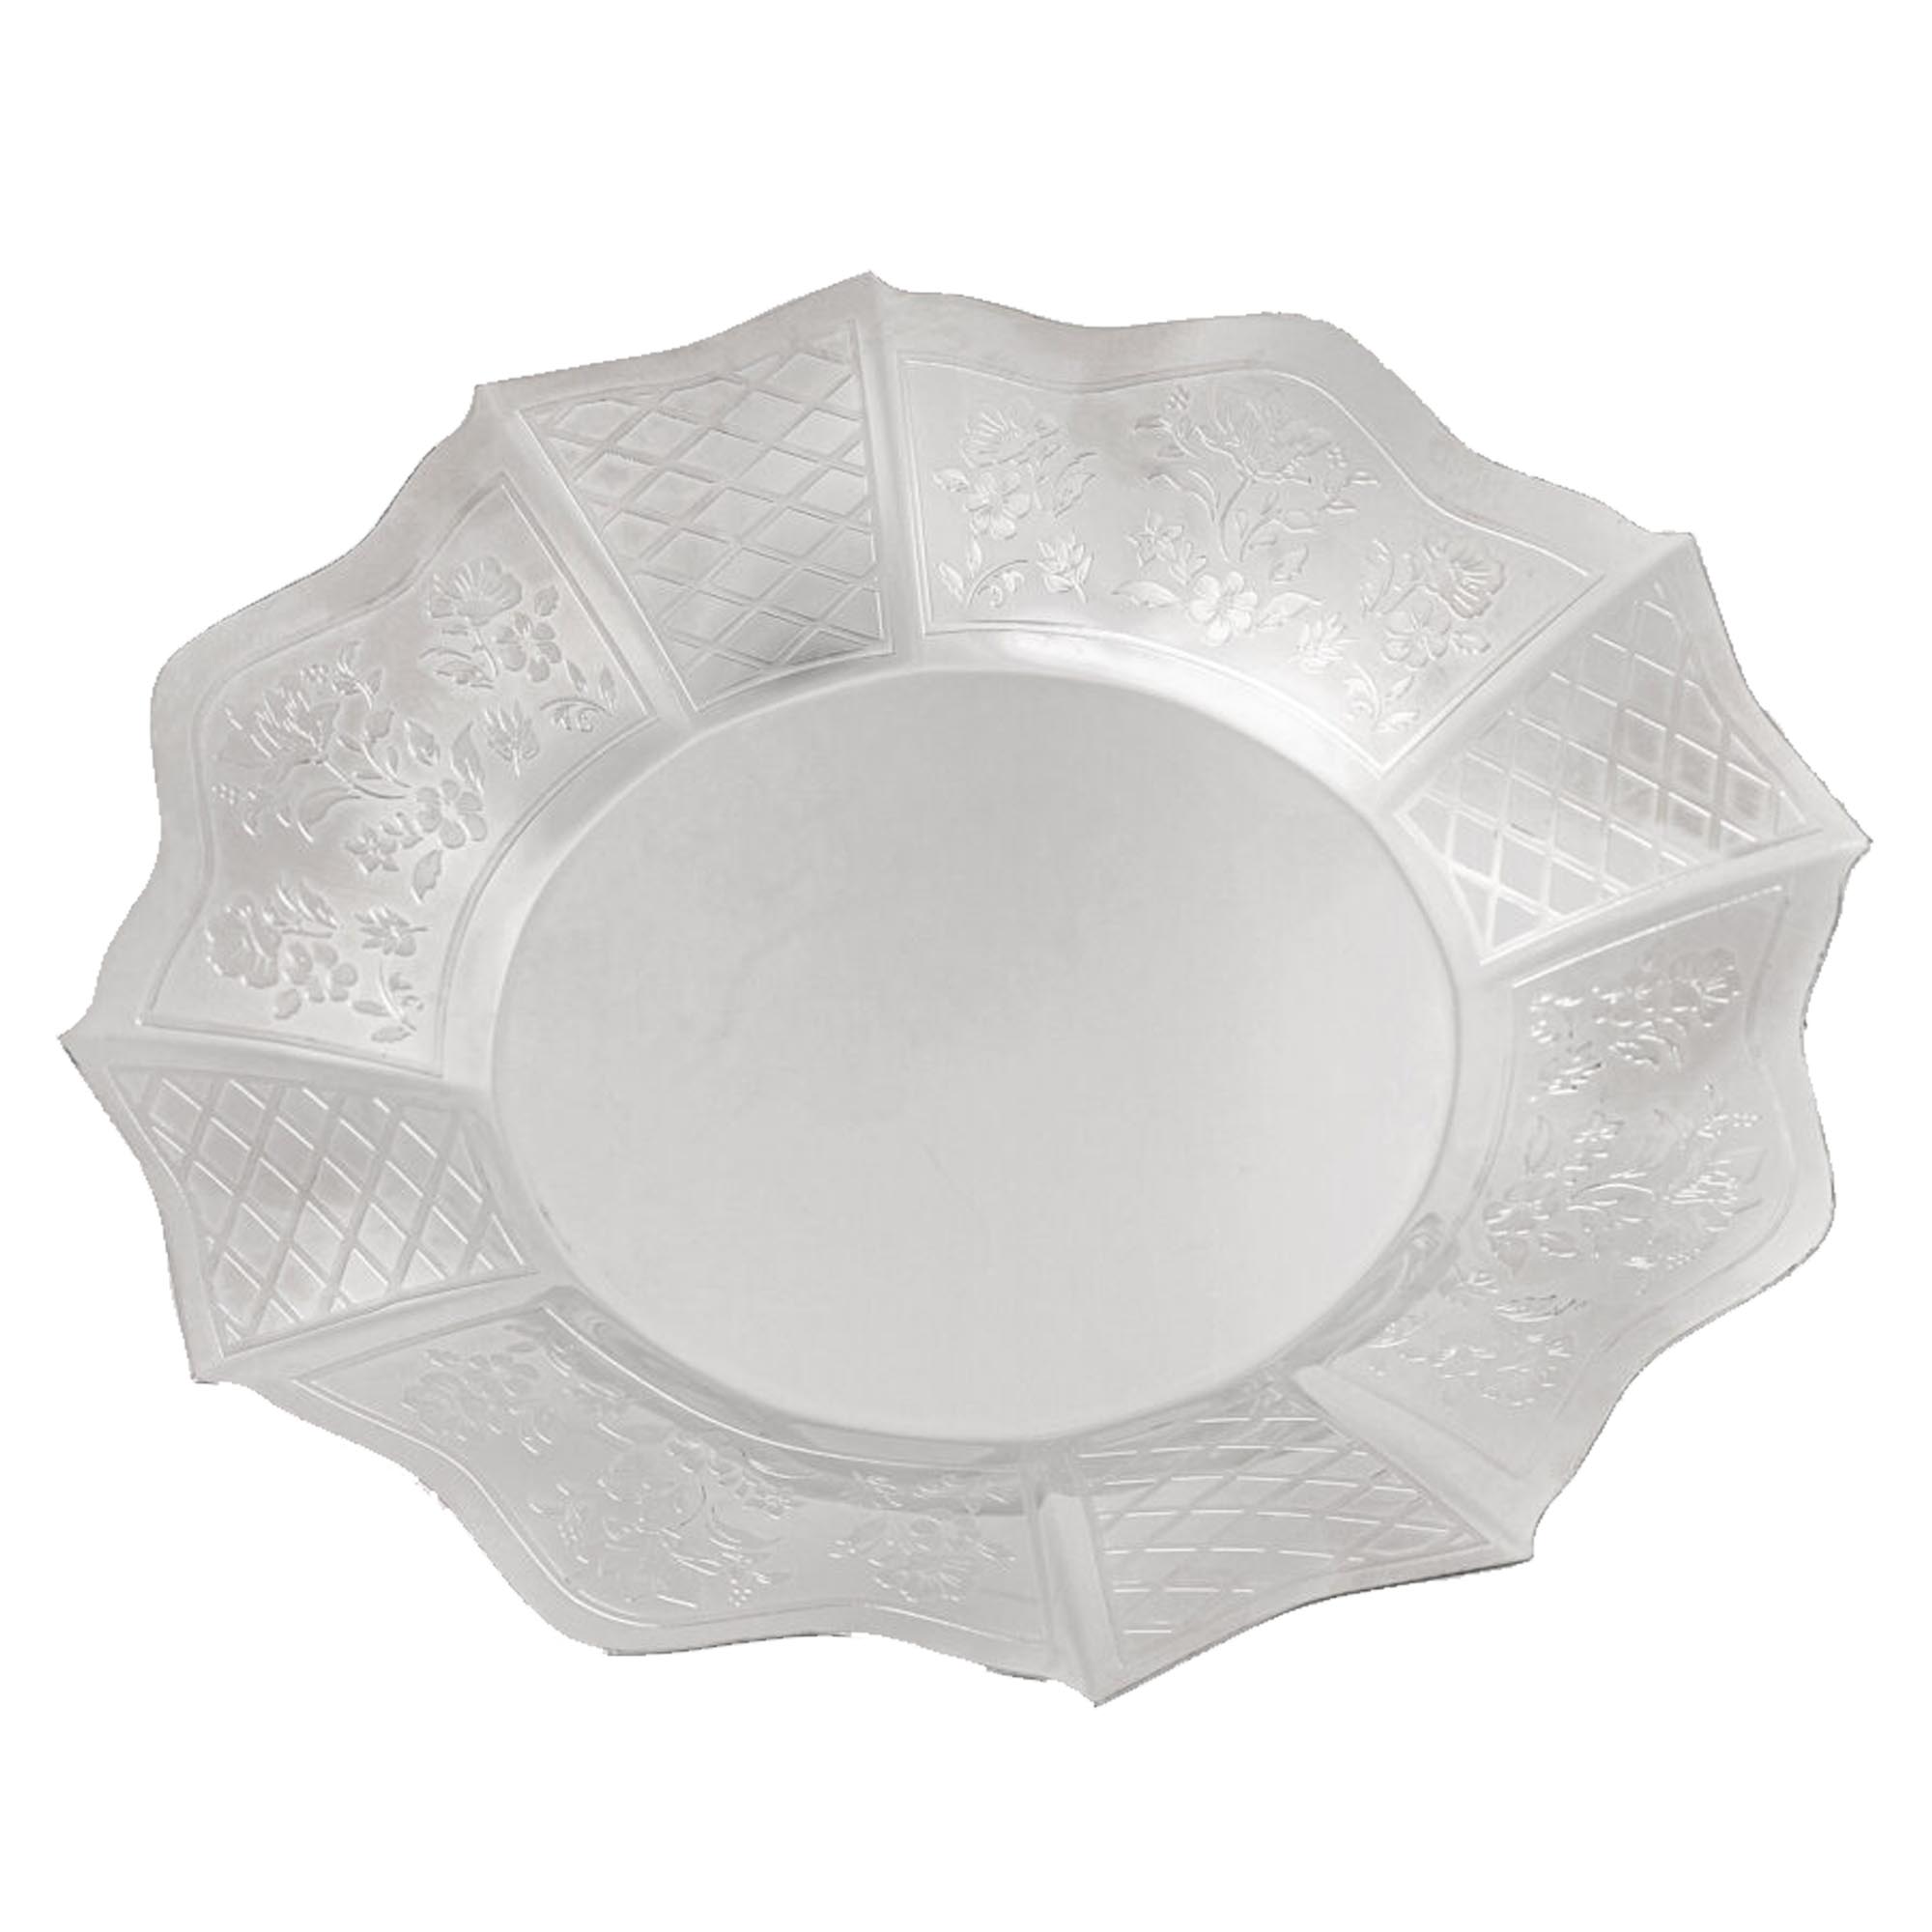 5.5oz Disposable Silver Kiddush Cups and Saucer for Seder Table